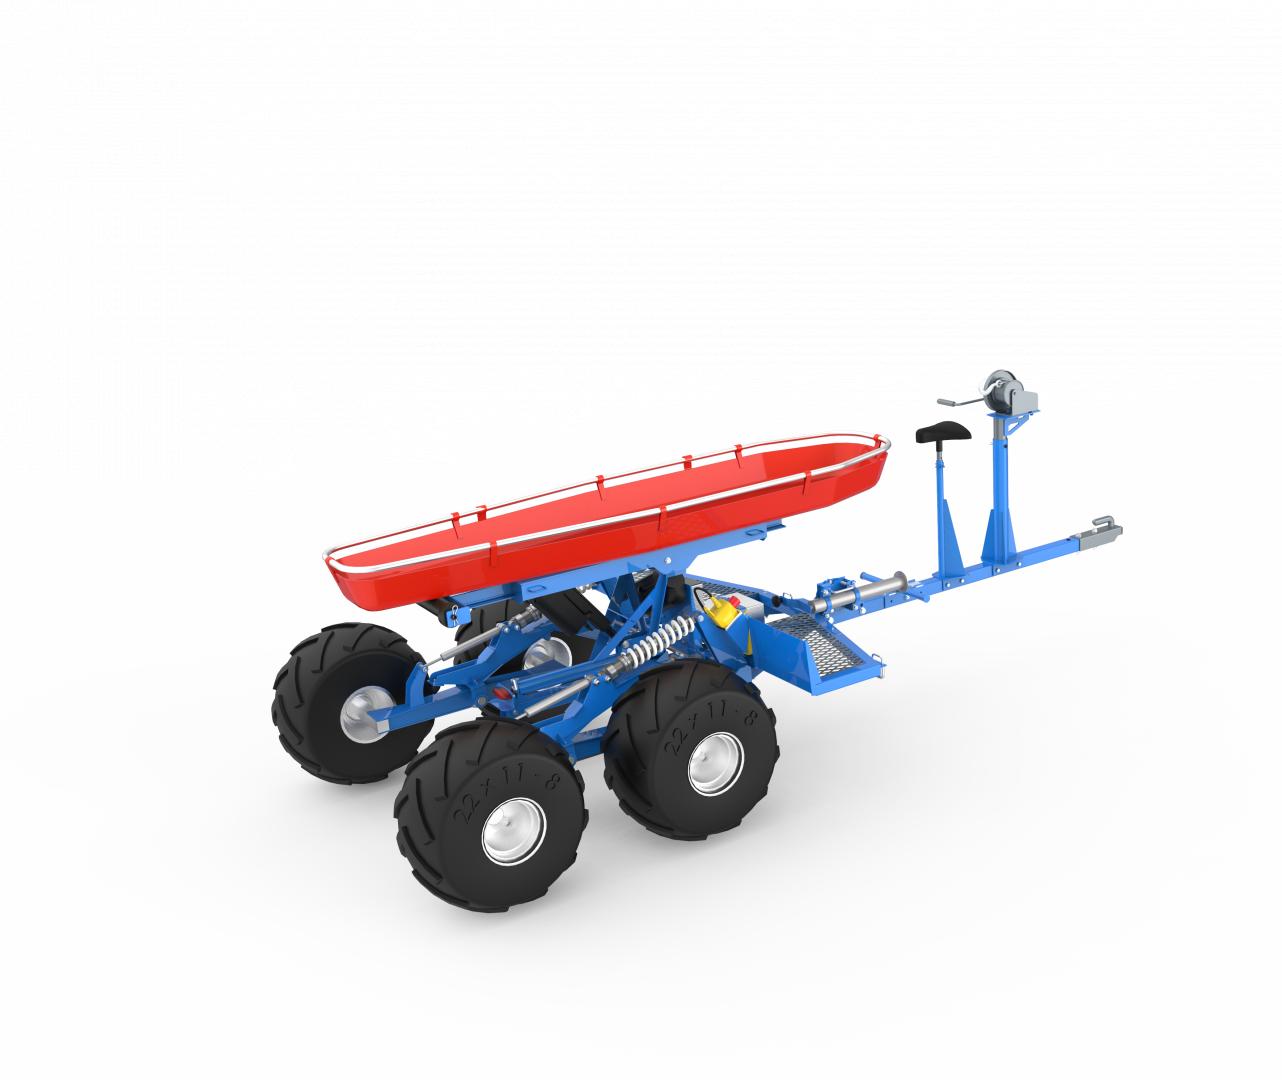 Self leveling Rescue vehicle with a stretcher to be used in rough terrain